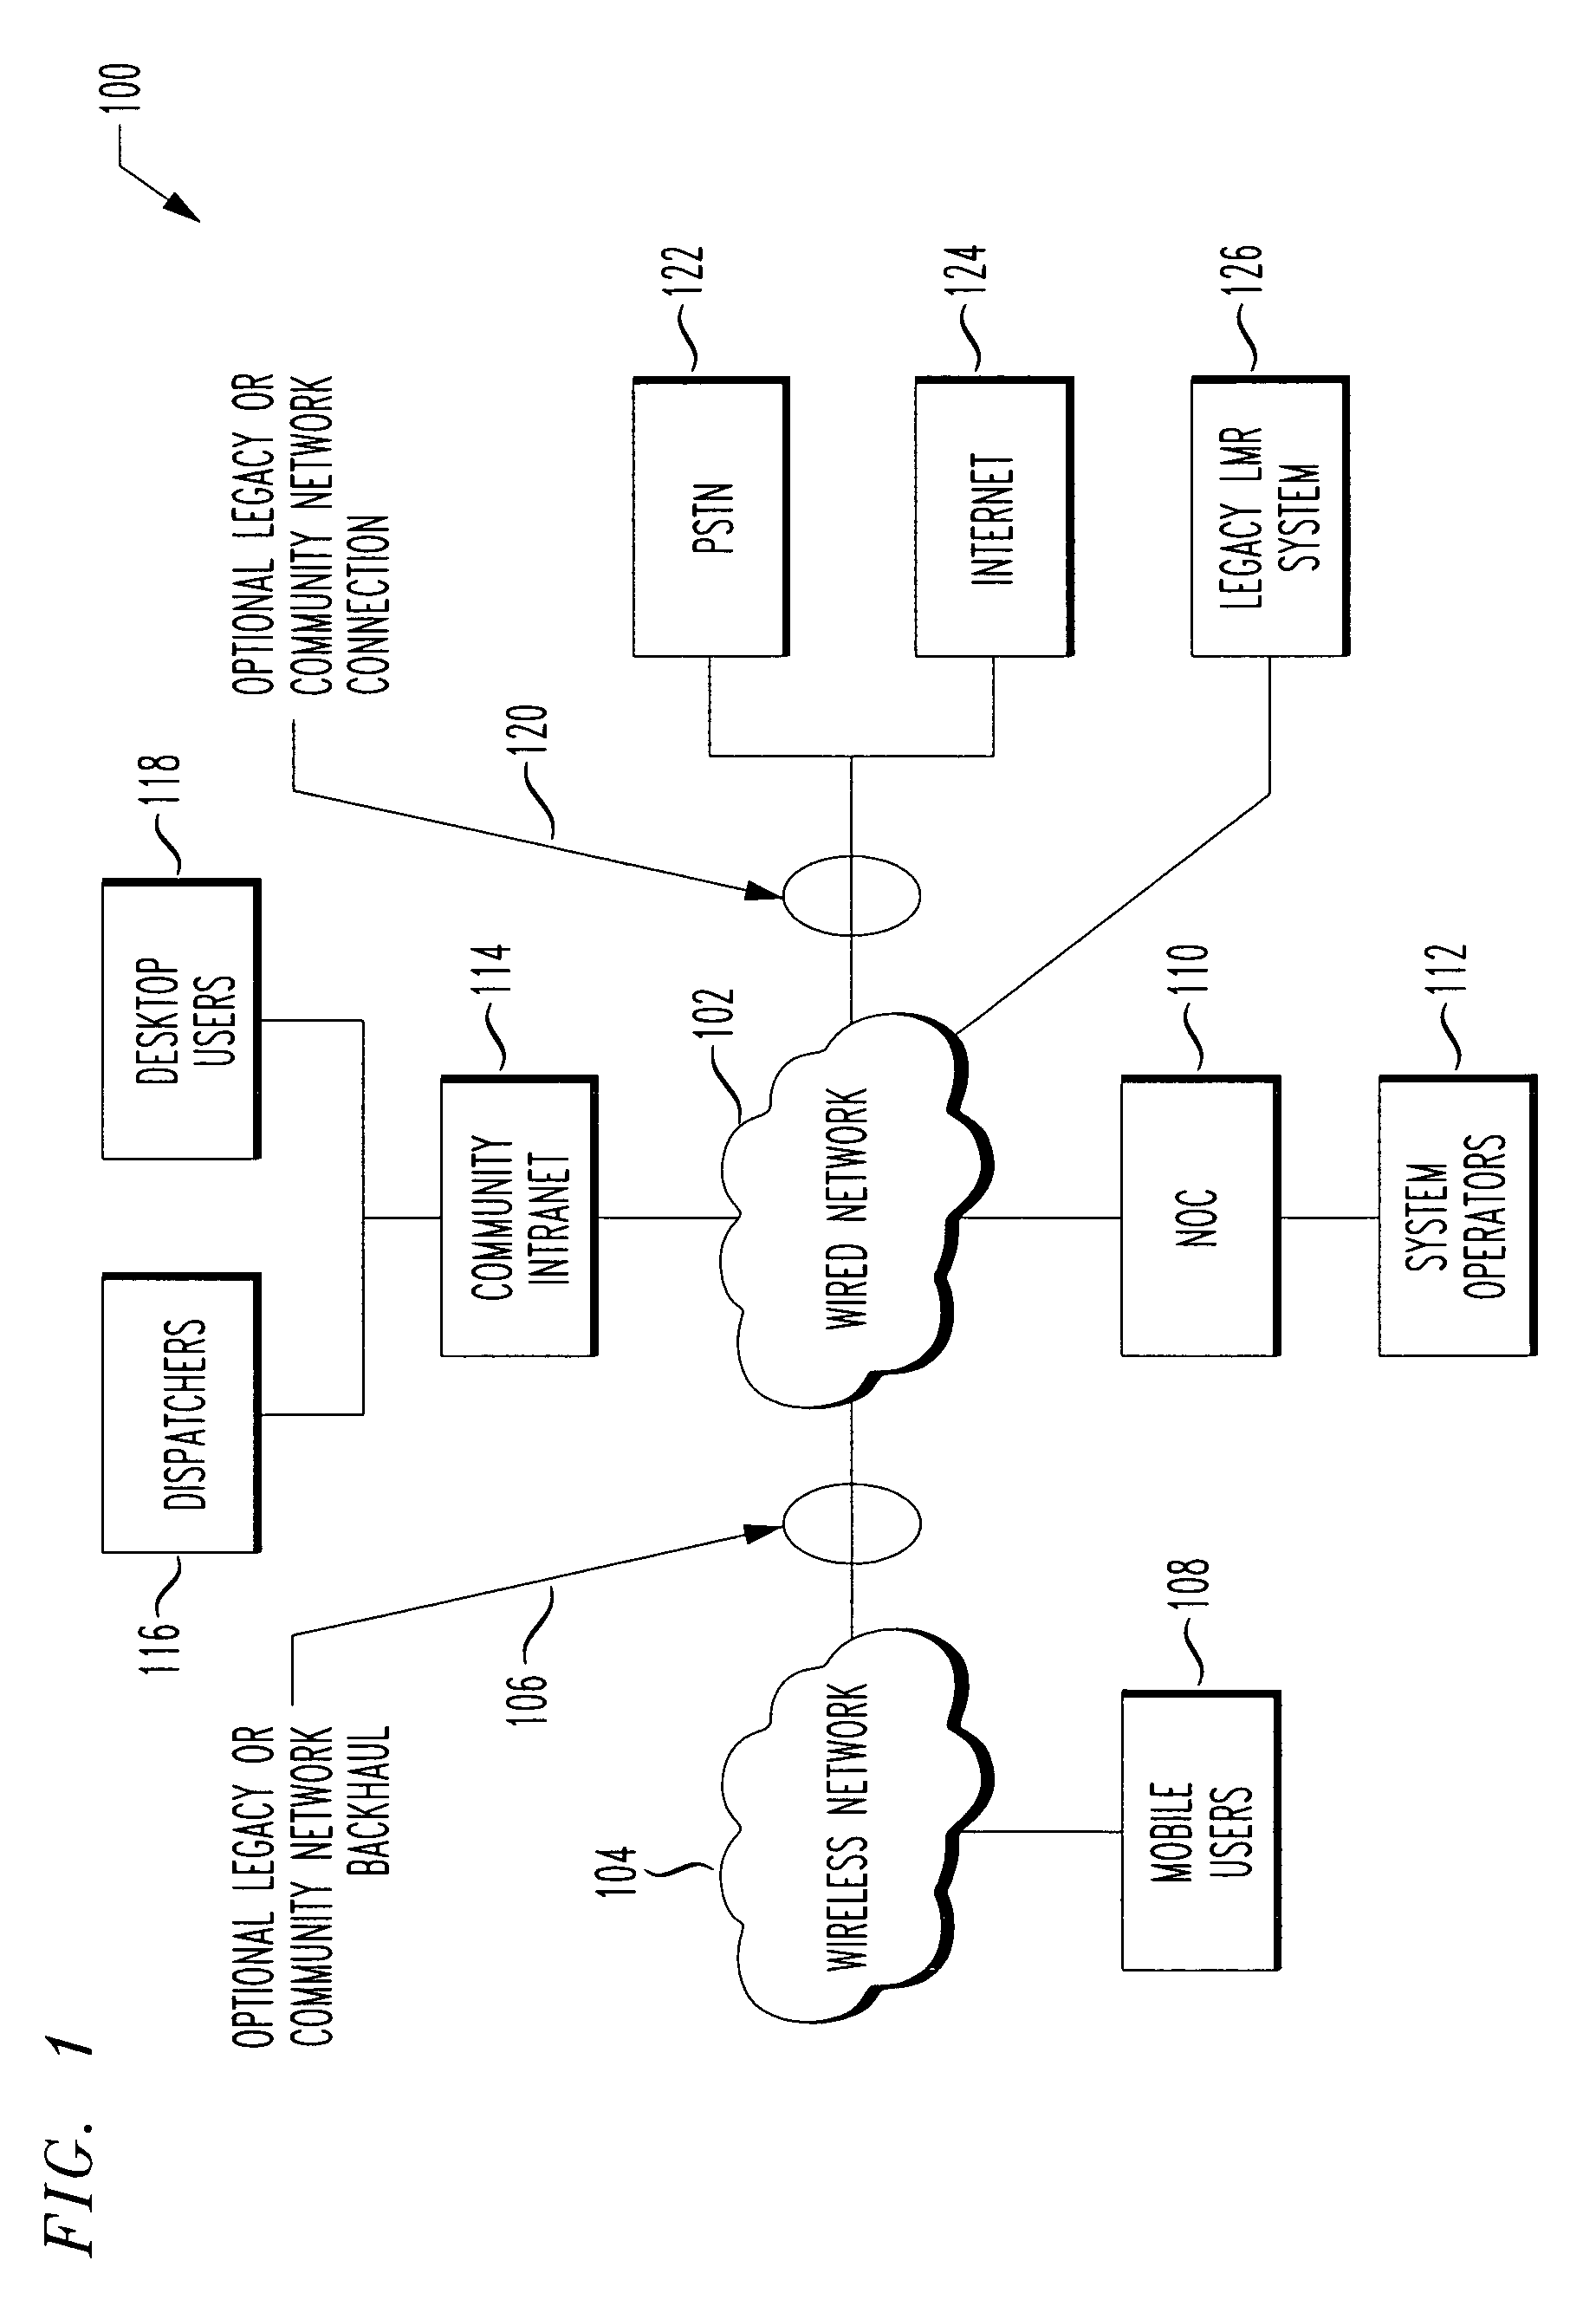 Distributed access gateway and wireless router pods and public safety communications infrastructure incorporating the same